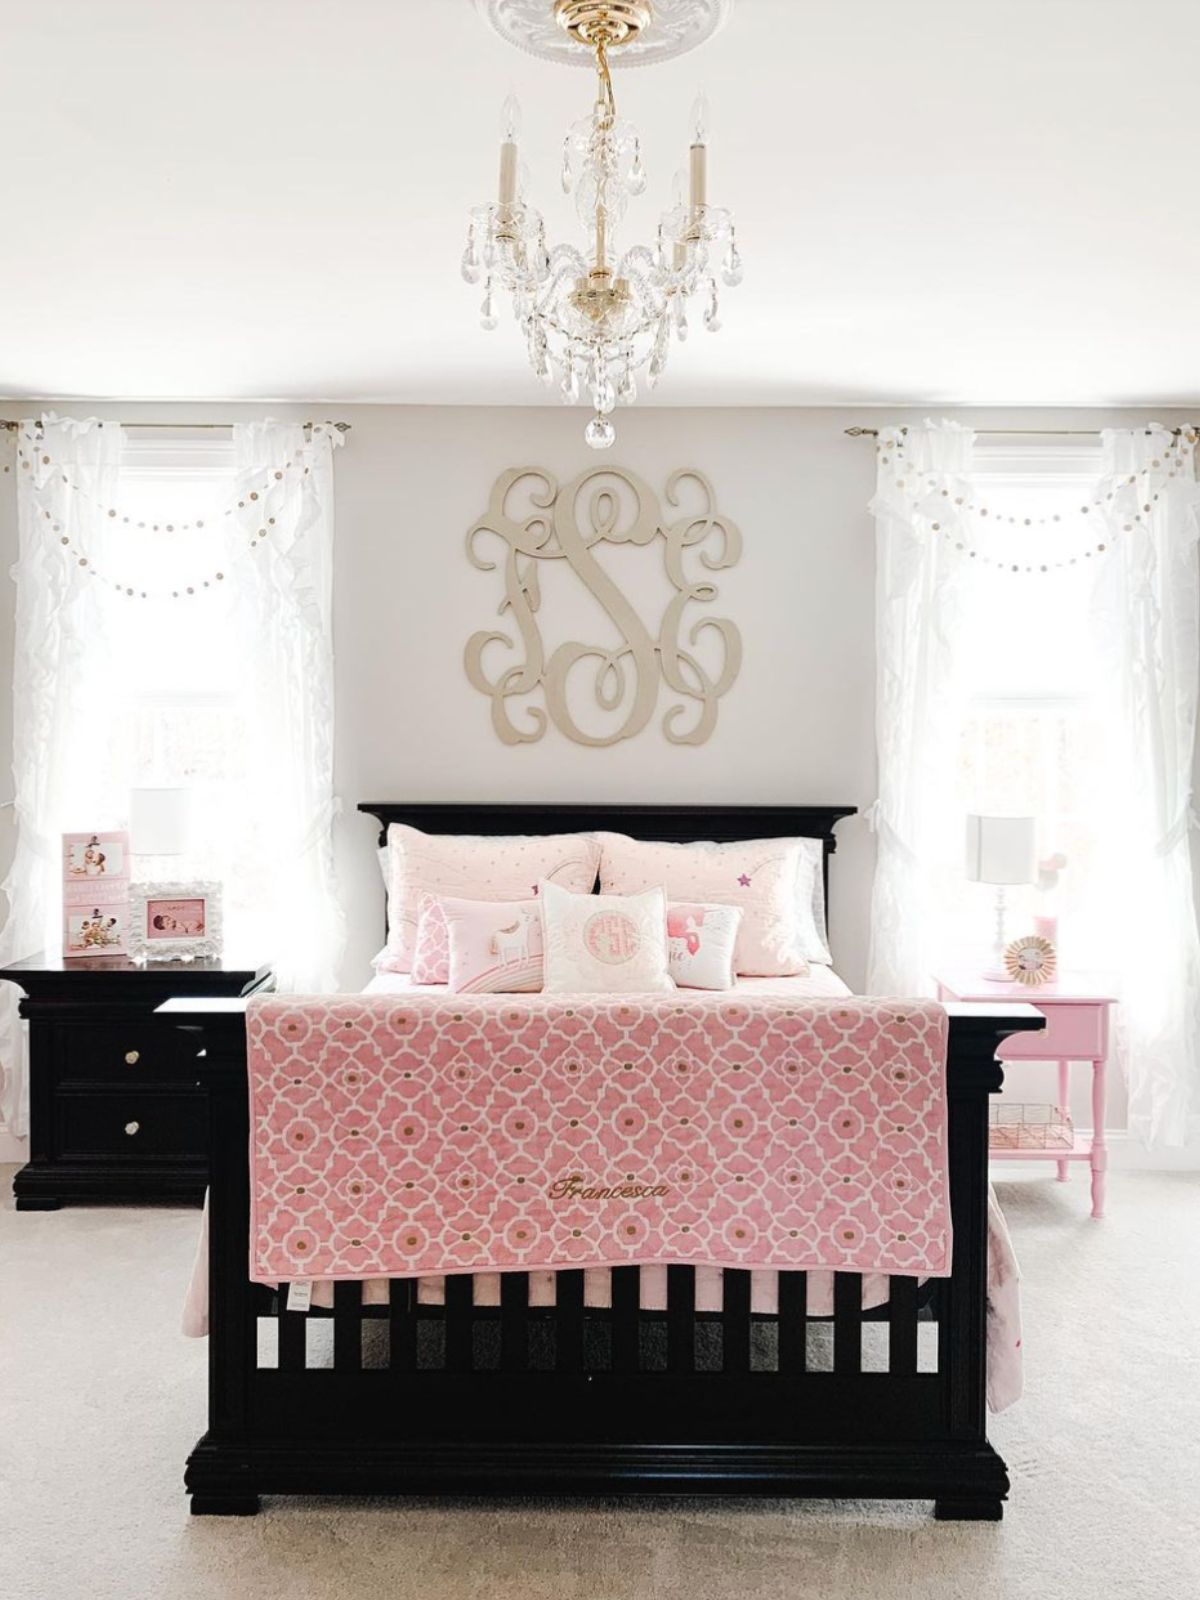 A girl's bedroom painted with popular gray.  here's a black bed with pink bedding and a chandelier overhead.